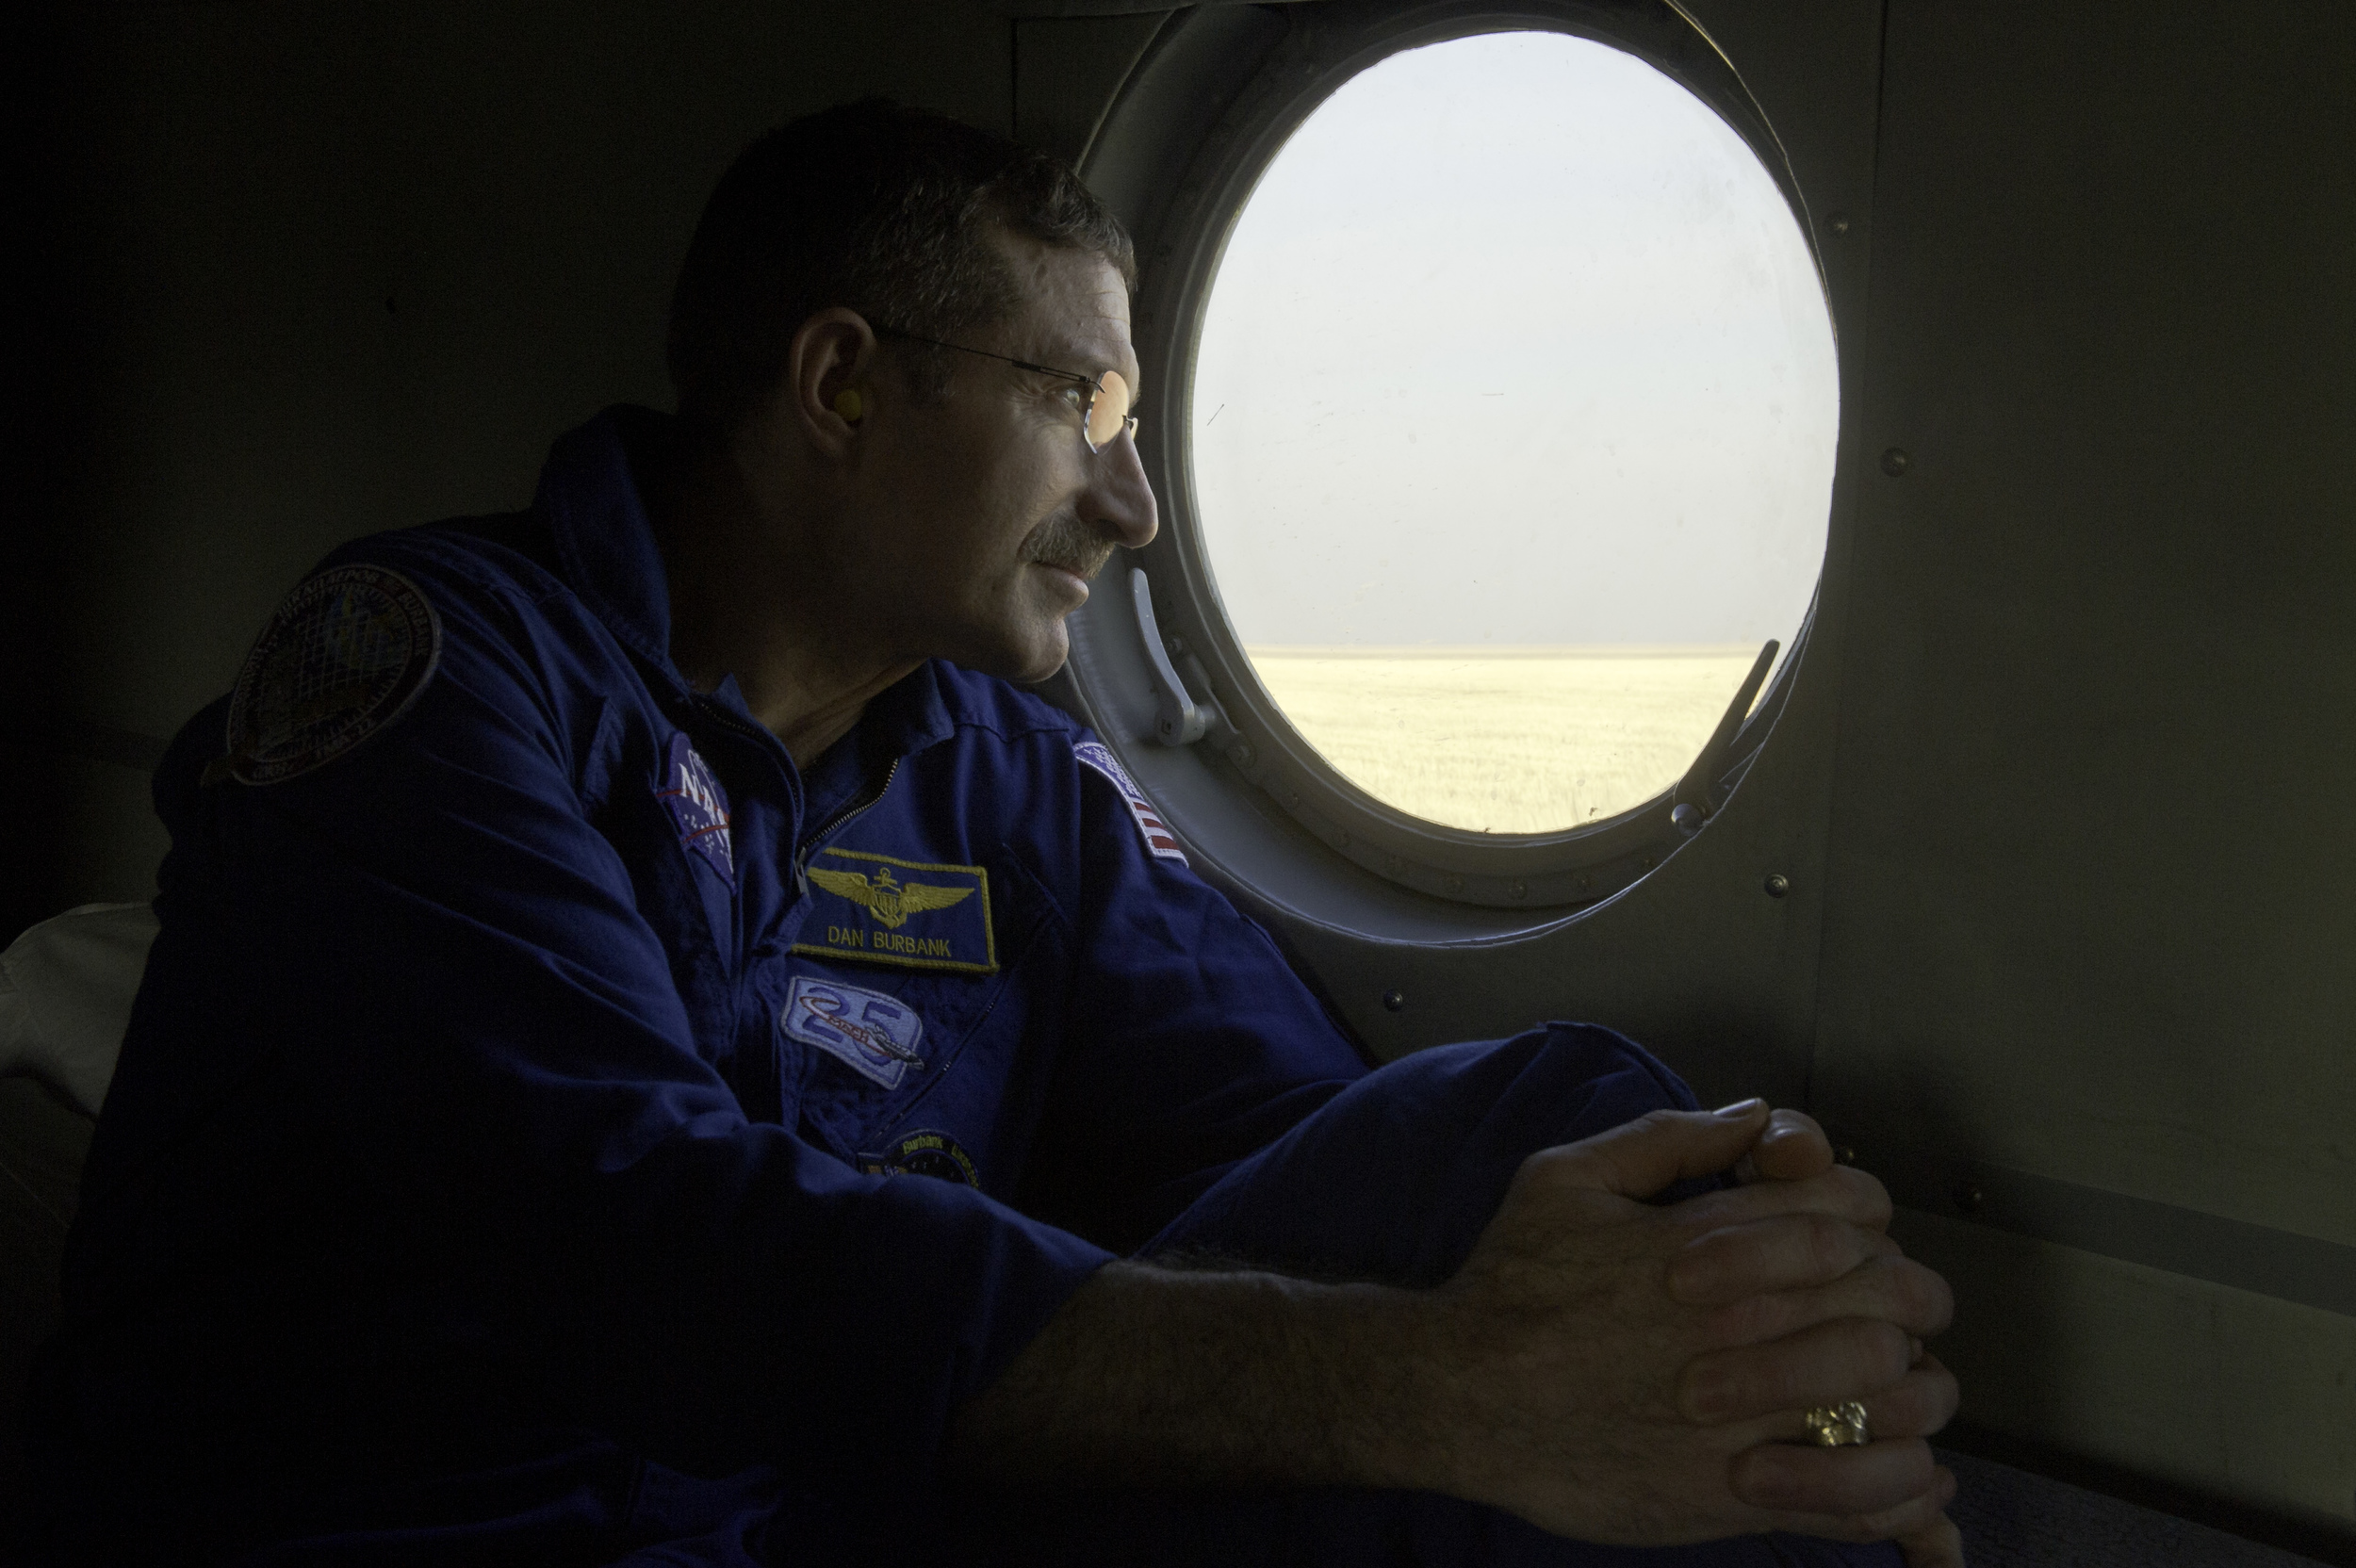  Expedition 30 Commander Dan Burbank looks out the window of his helicopter as it prepares to depart for Kustanai from the Soyuz TMA-22 capsule landing site outside of the town of Arkalyk, Kazakhstan on Friday, April 27, 2012. Astronaut Burbank, Russ